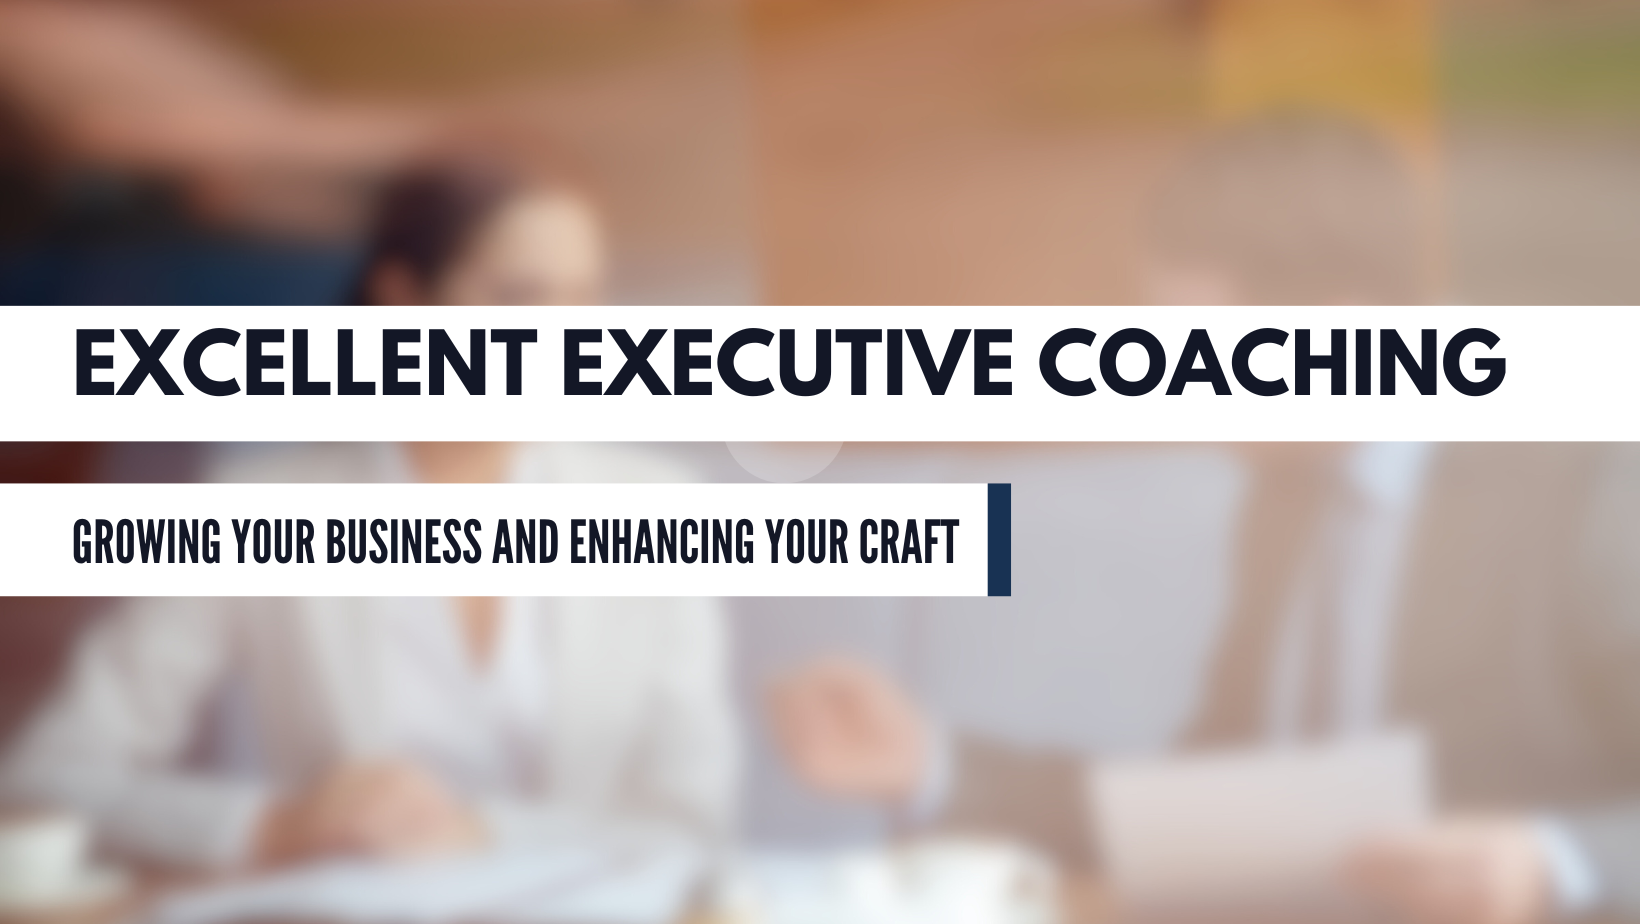 Excellent Executive Coaching Podcast – Listen Here